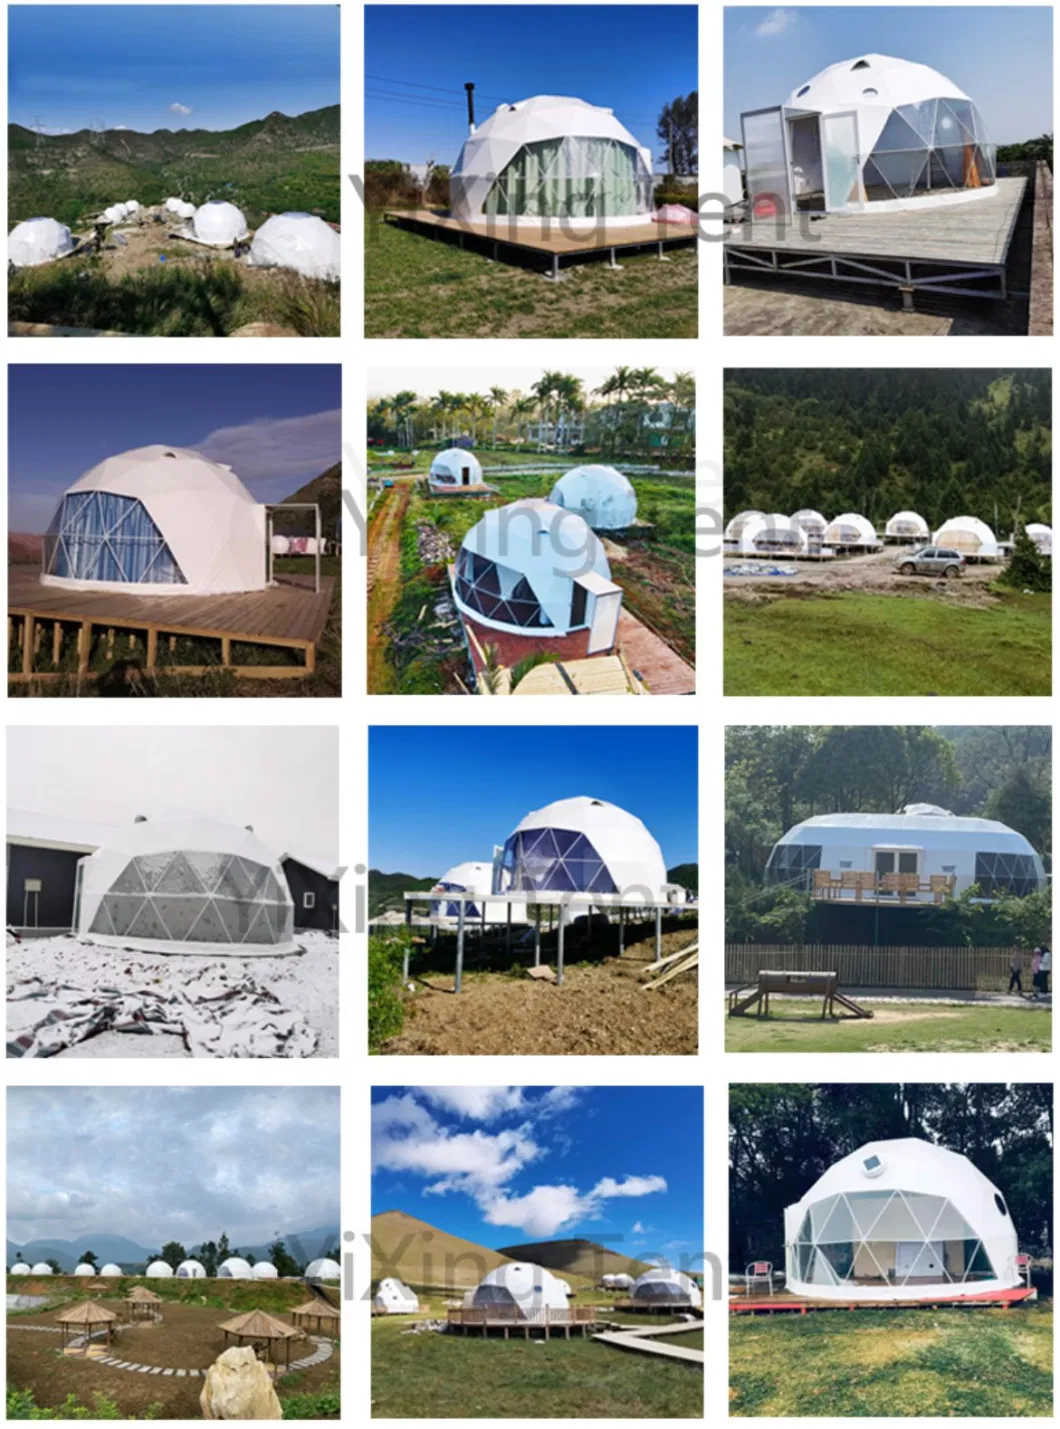 Gala Geodesic Event Glamping Canopy Family Exhibition Camping Dome Tent for Travel Resort for Sale